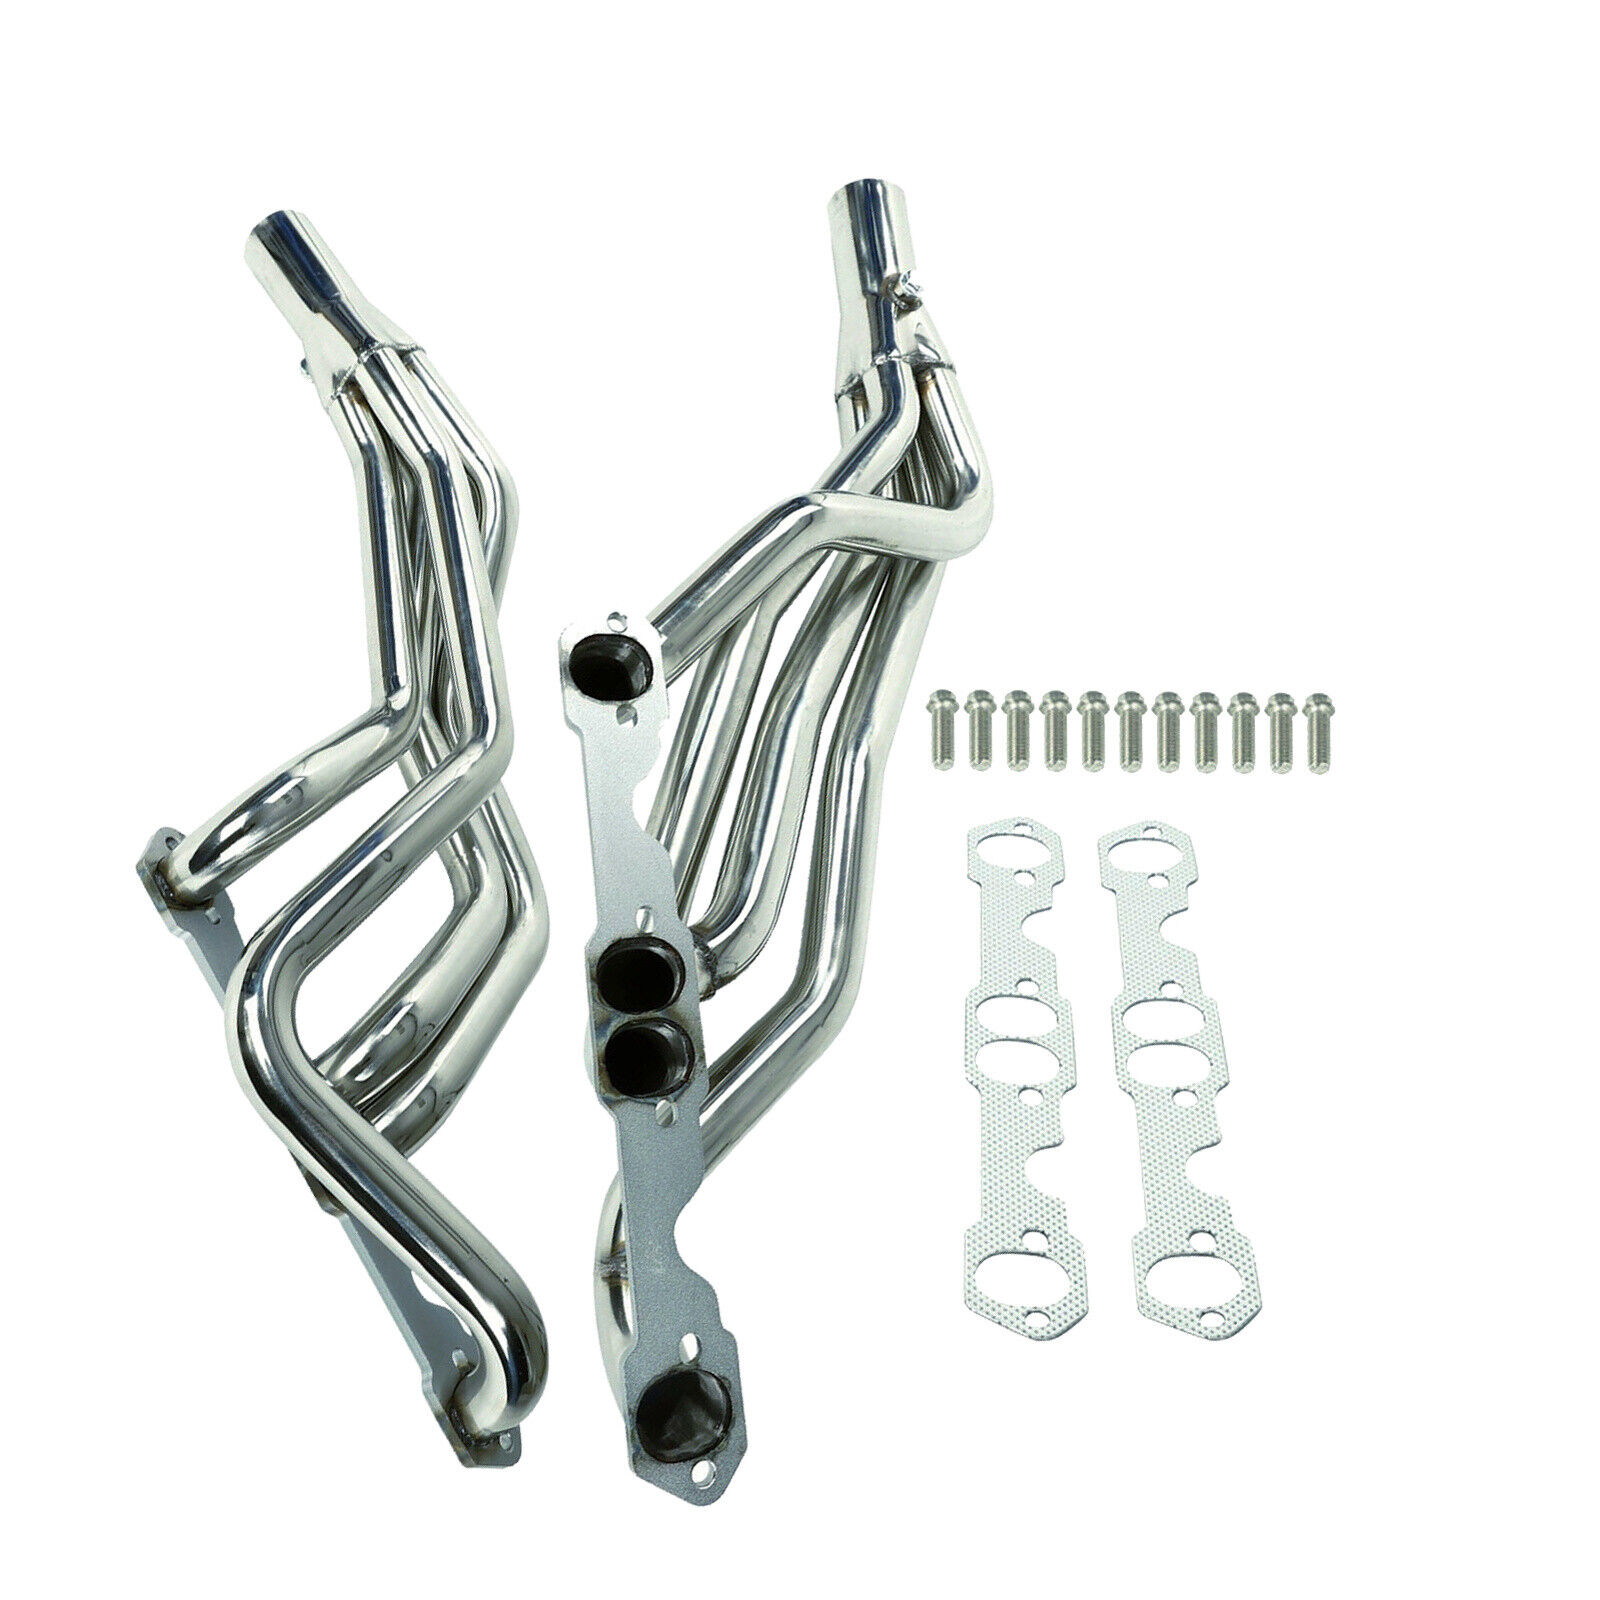 New Stainless Steel Manifold Headers For 93-97 Chevy Camaro/Firebird 5.7L LT1 wv